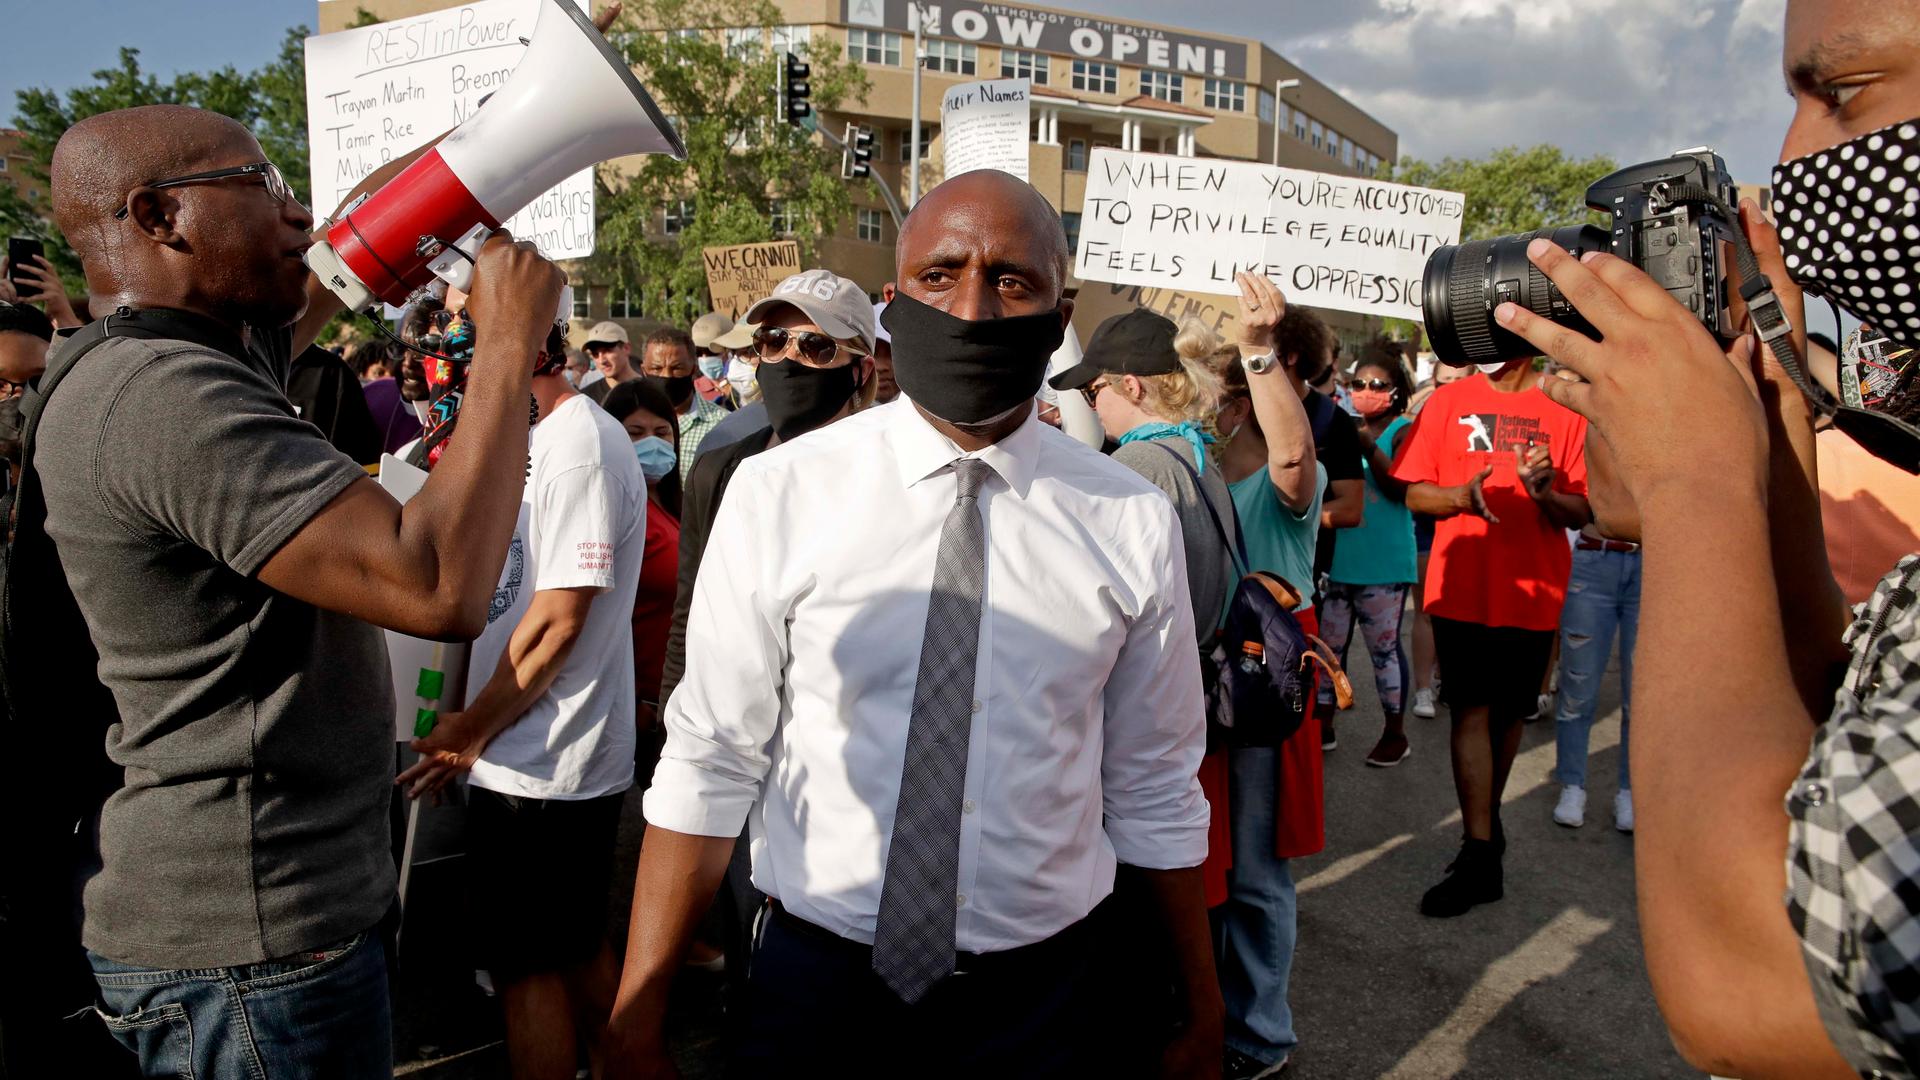 Kansas City mayor Quinton Lucas, center, walks among protesters Wednesday, June 3, 2020, in Kansas City, Mo., during a unity march to protest against police brutality following the death of George Floyd.